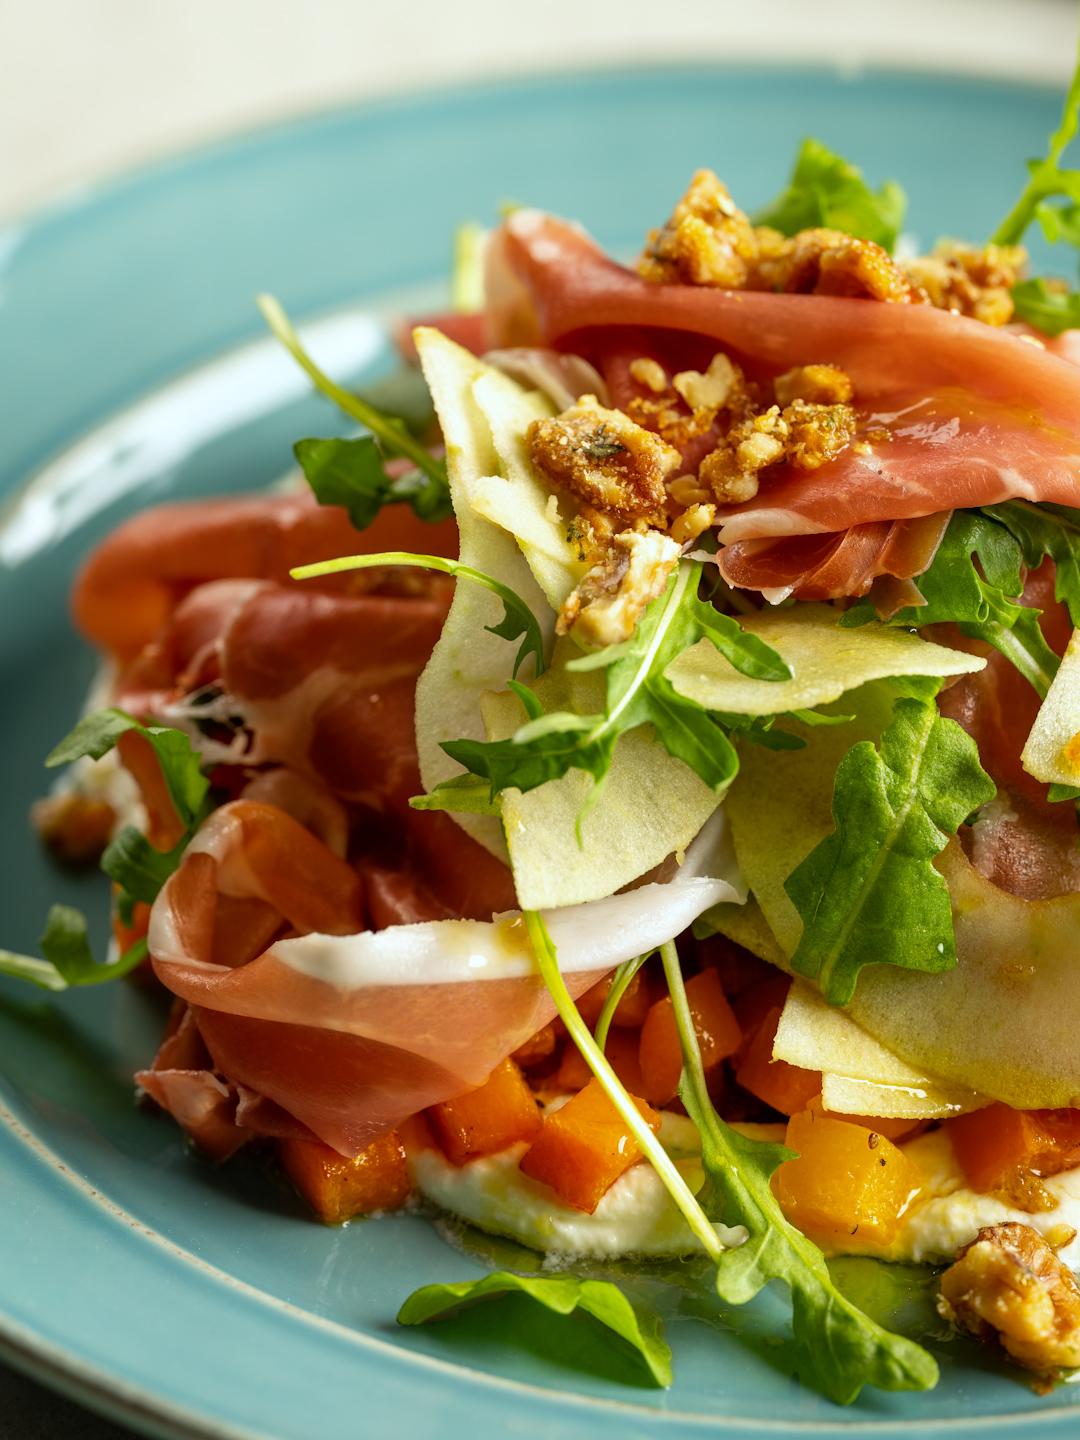 Roasted Butternut Squash, Prosciutto and Whipped Goat Cheese Salad